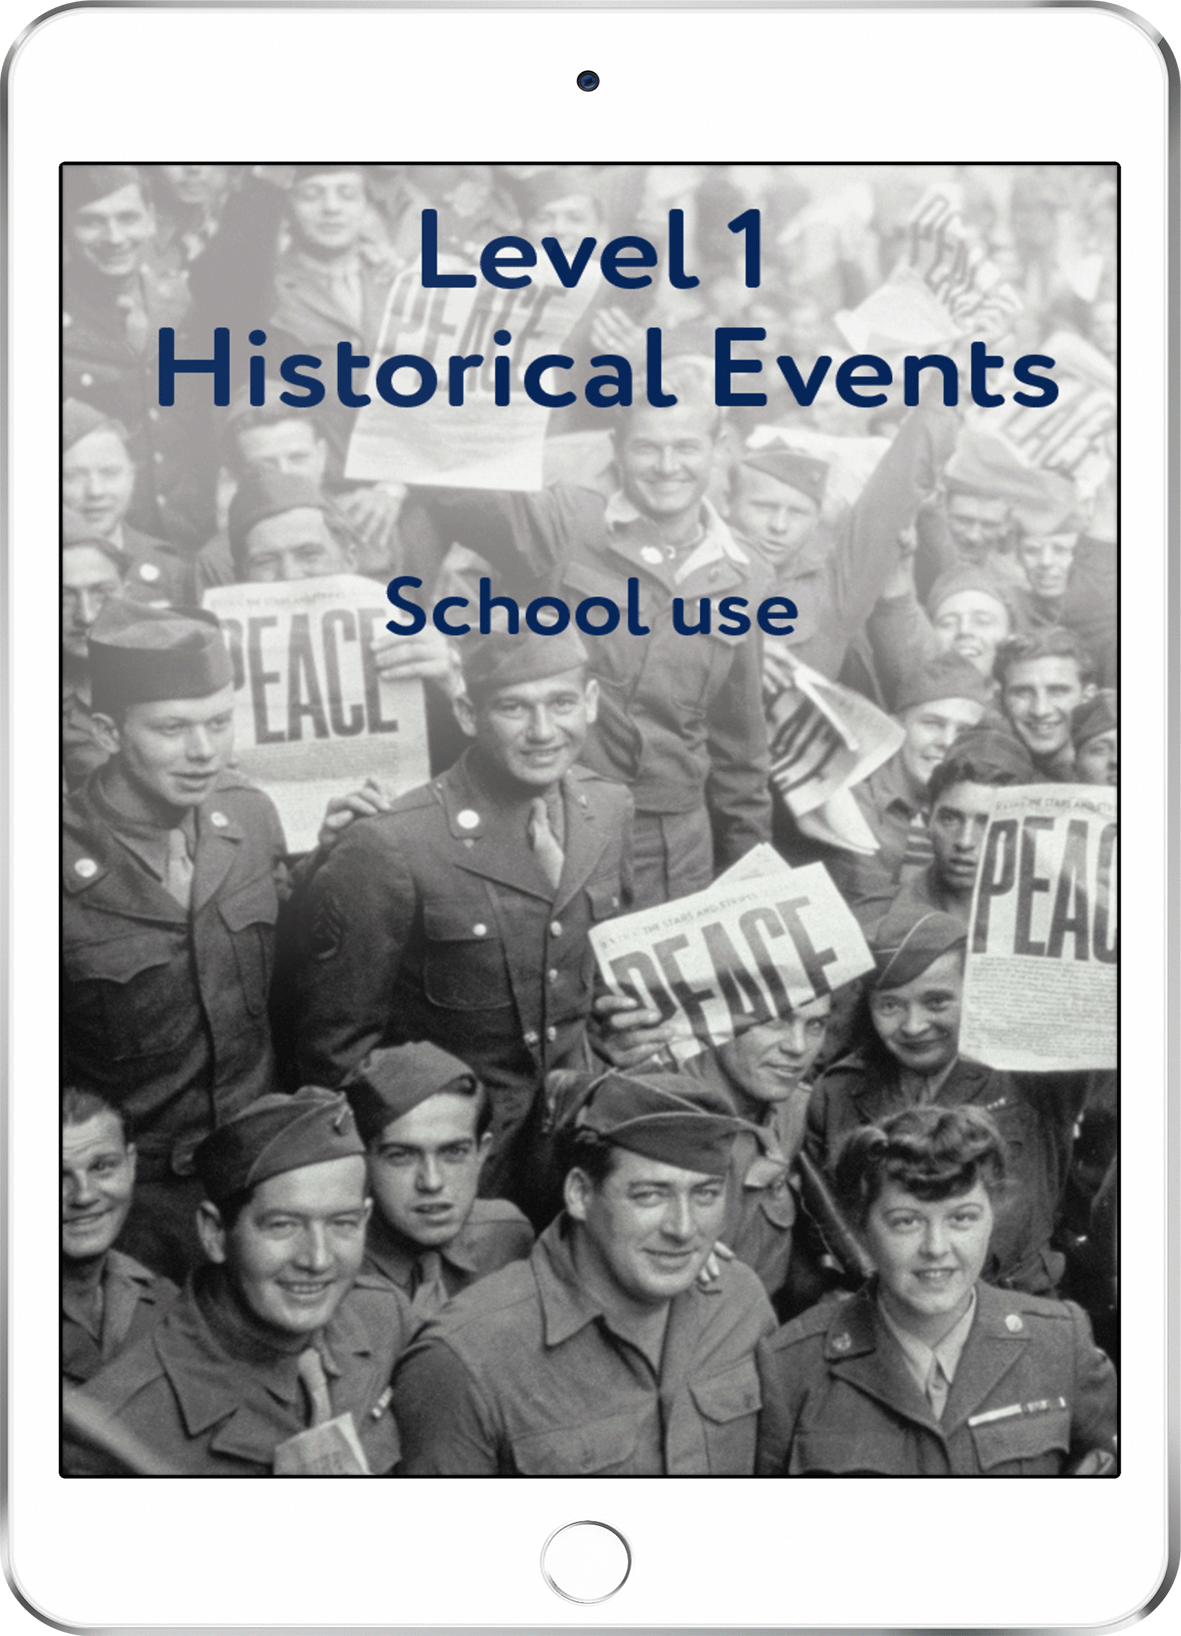 Level 1 Historical Events - School Use